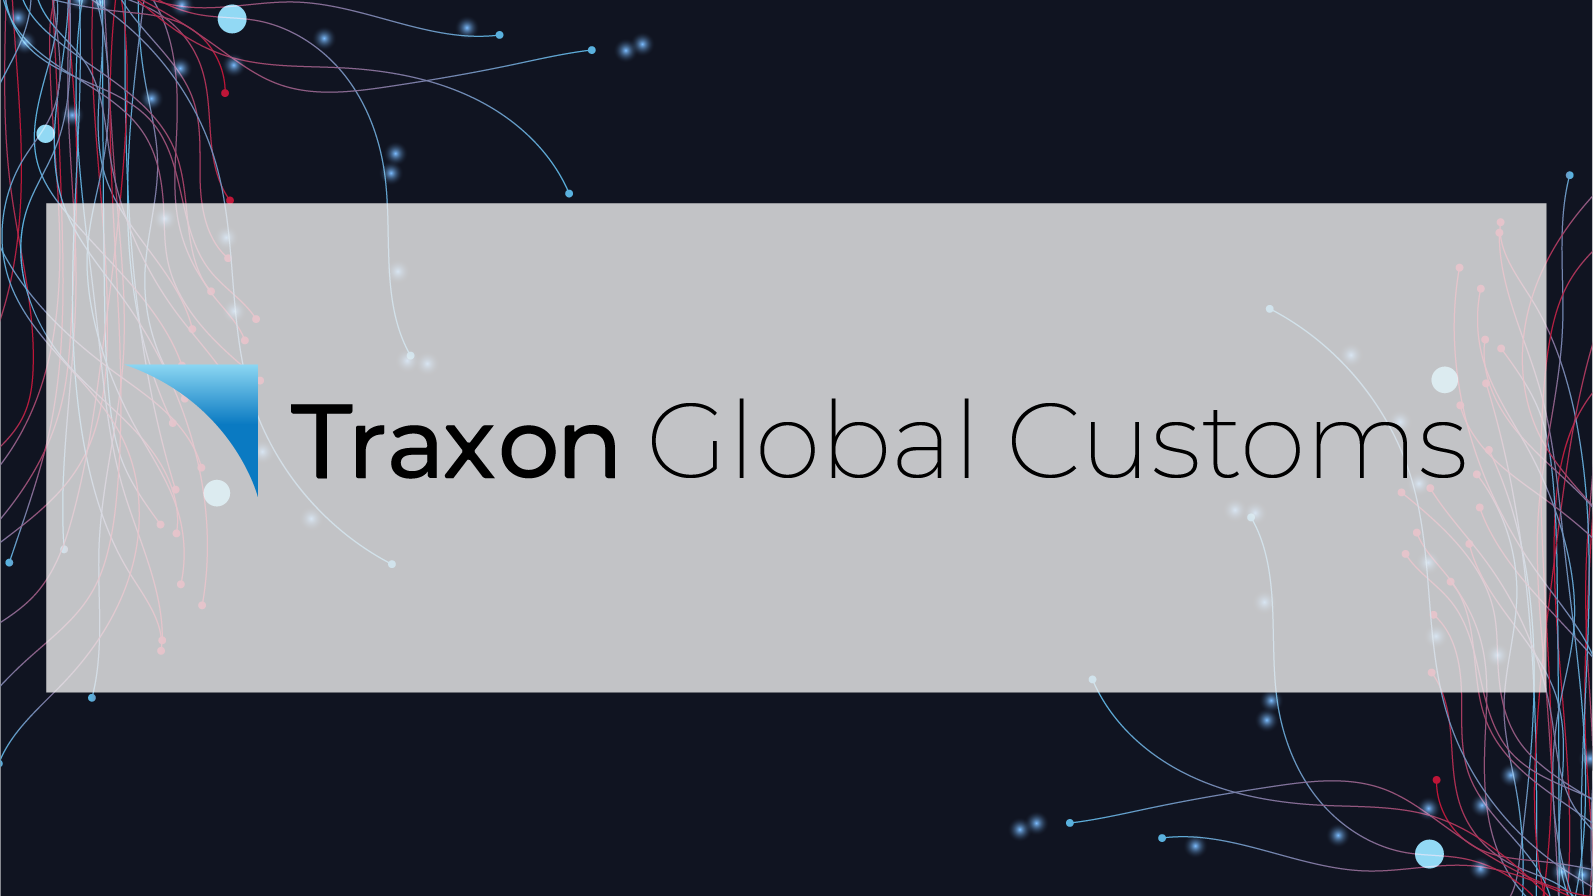 Download Banners_Traxon Global Customs